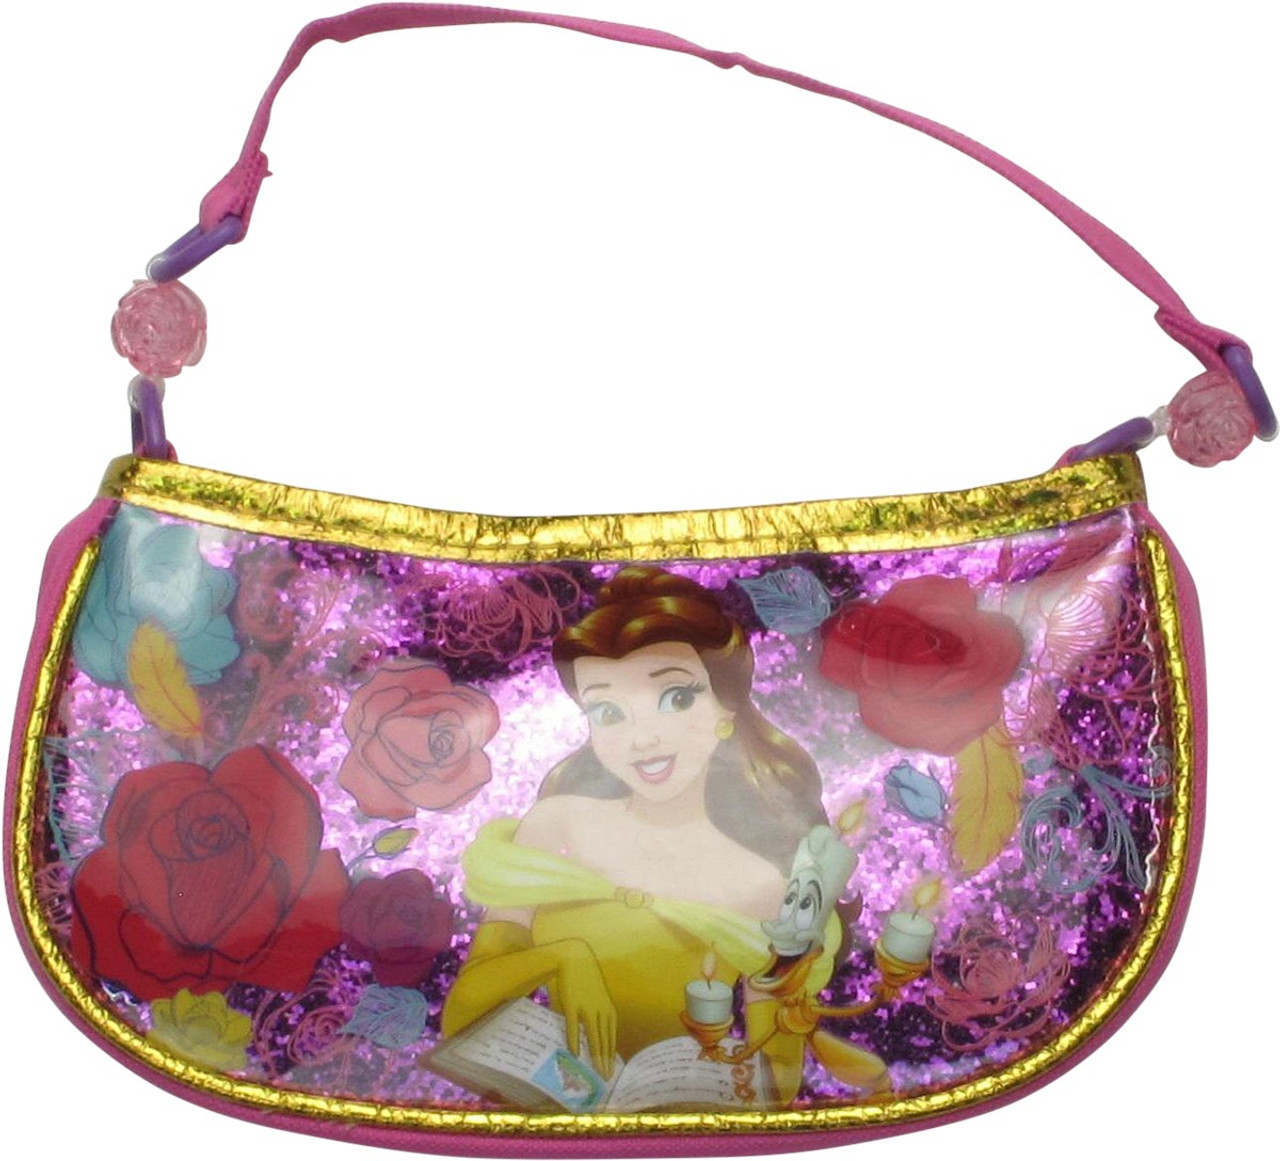 Boenjoy Gifts - Disney Princess Belle Silicone Coin Purse Keychain |  Children's Princess Silicone Purse | Headphone Bag, Storage Small Bag |  Return Gift for Kids Teenagers | Belle 1 Pc : Amazon.in: Bags, Wallets and  Luggage